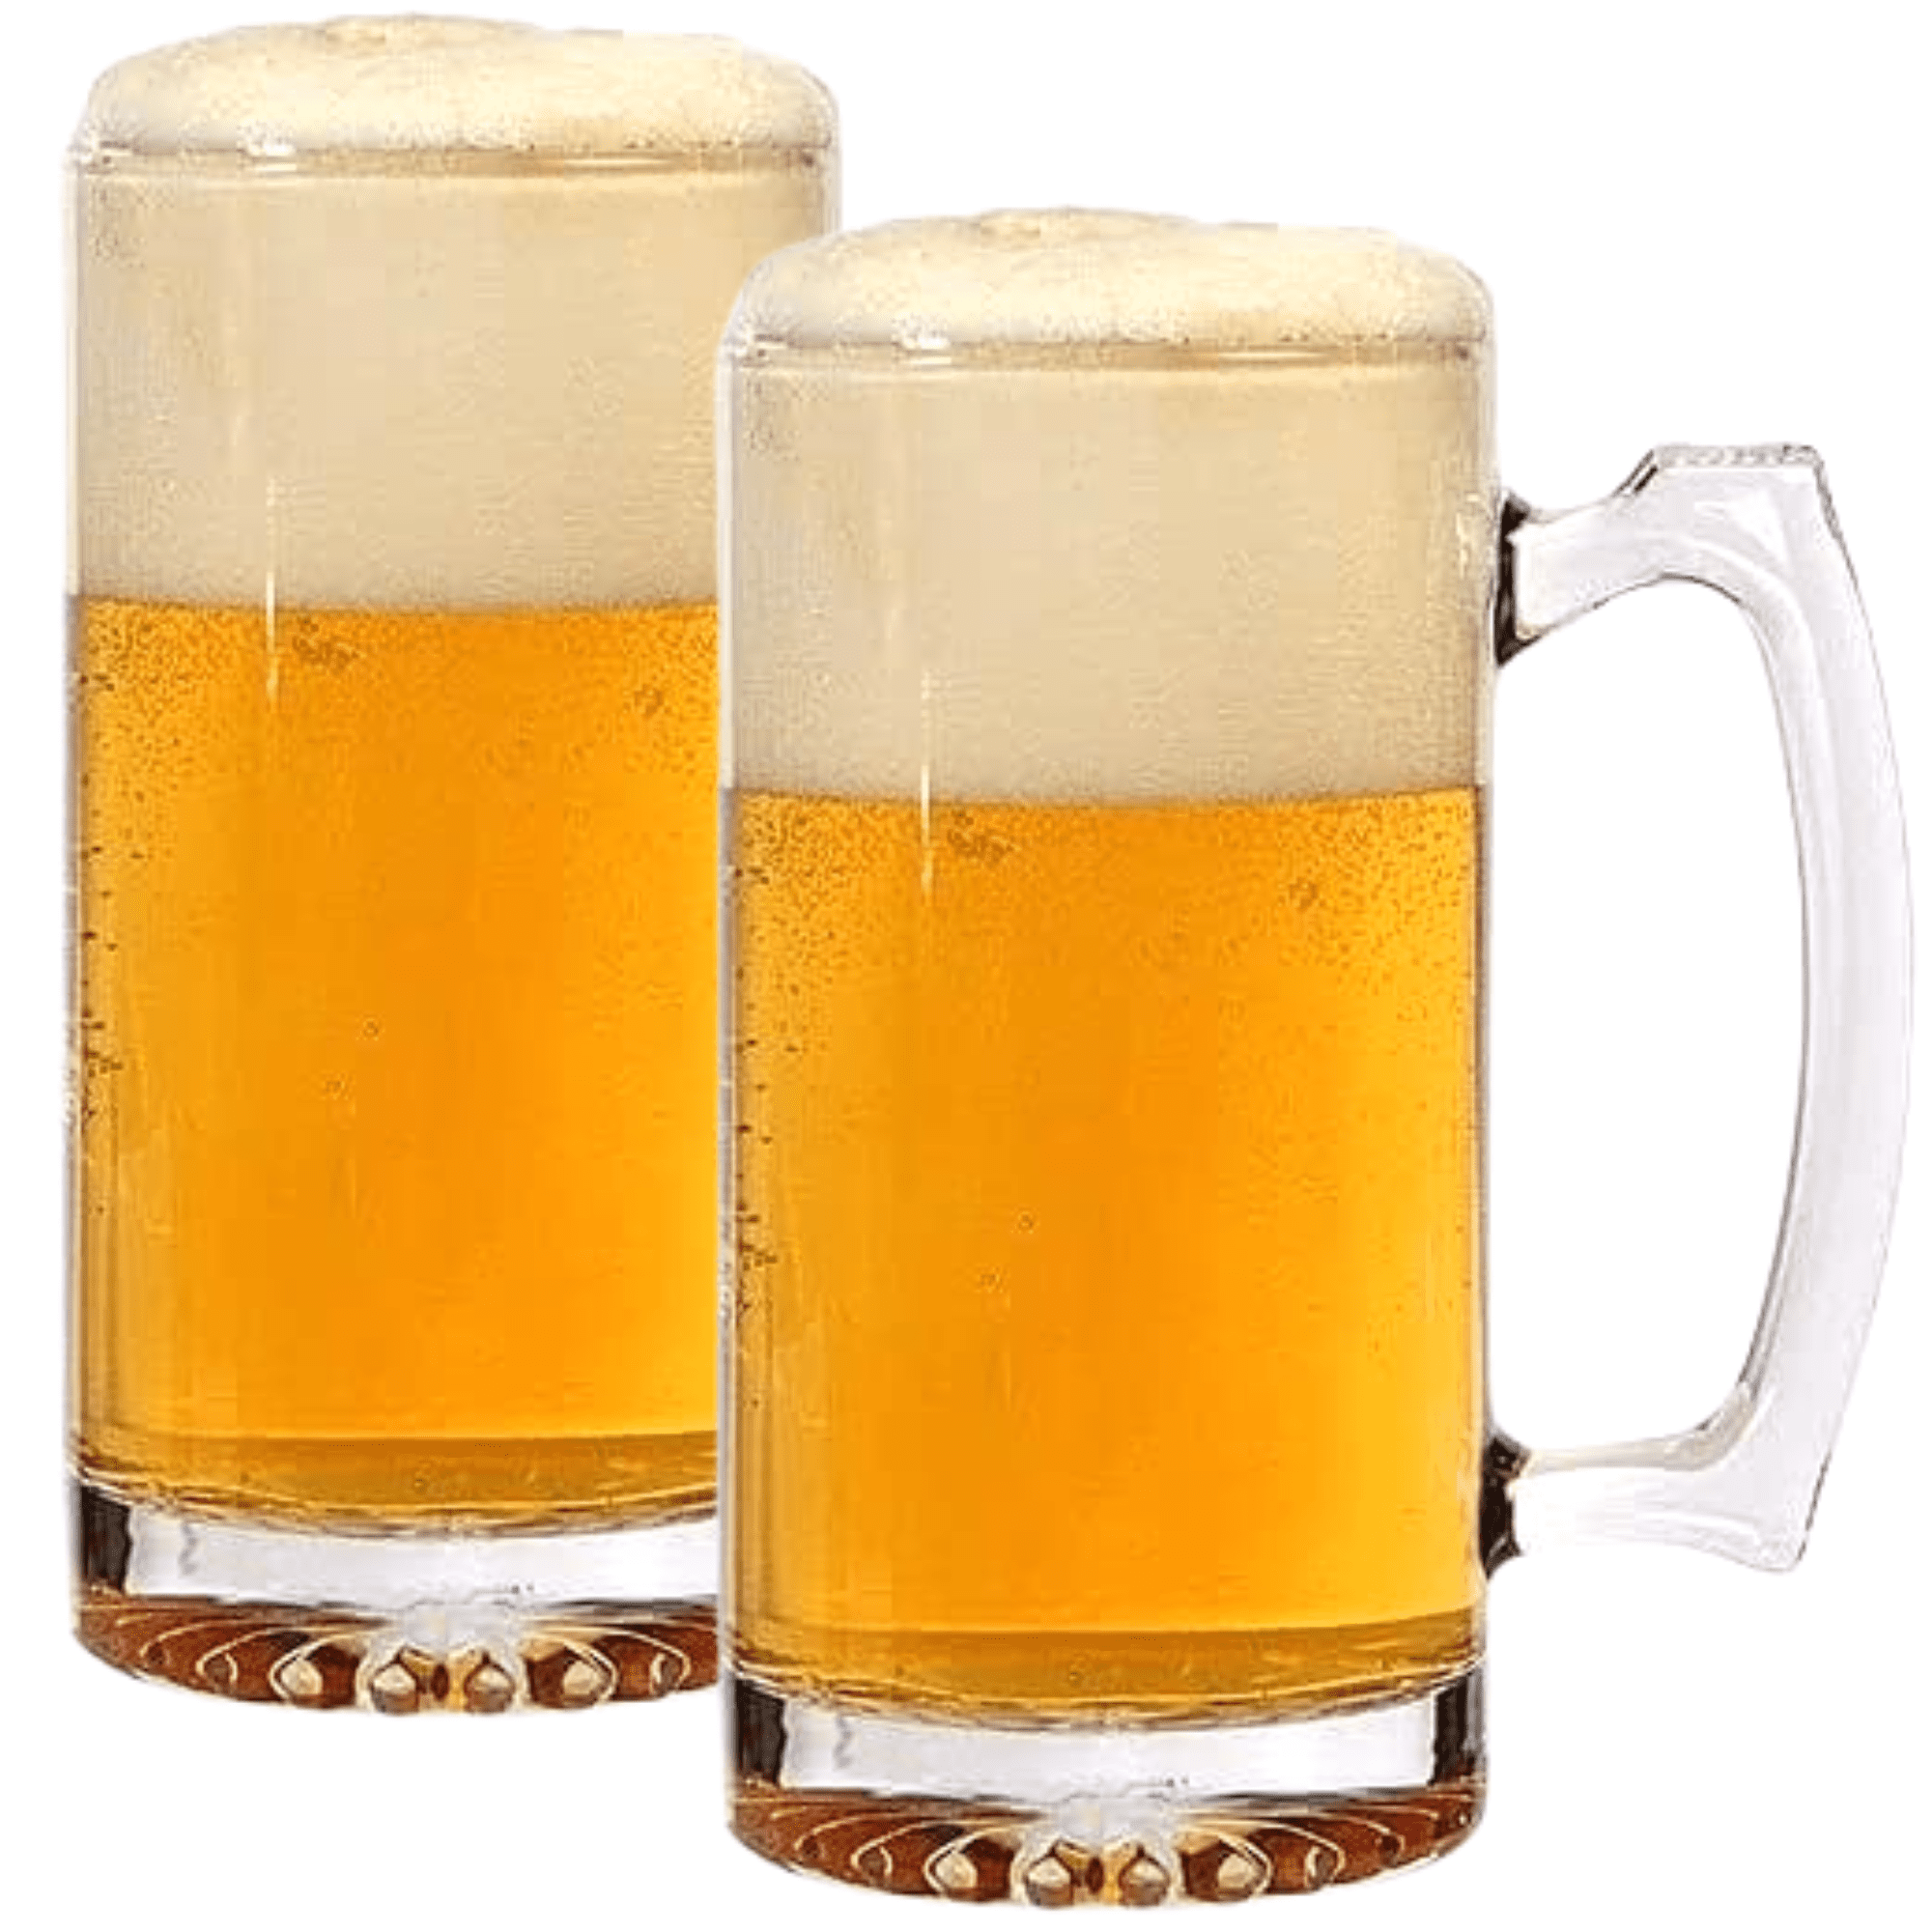 Beer Glasses, Glass Mugs With Handle 16oz, Large Beer Glasses For Freezer,  Beer Cups Drinking Glasses, Set of 2